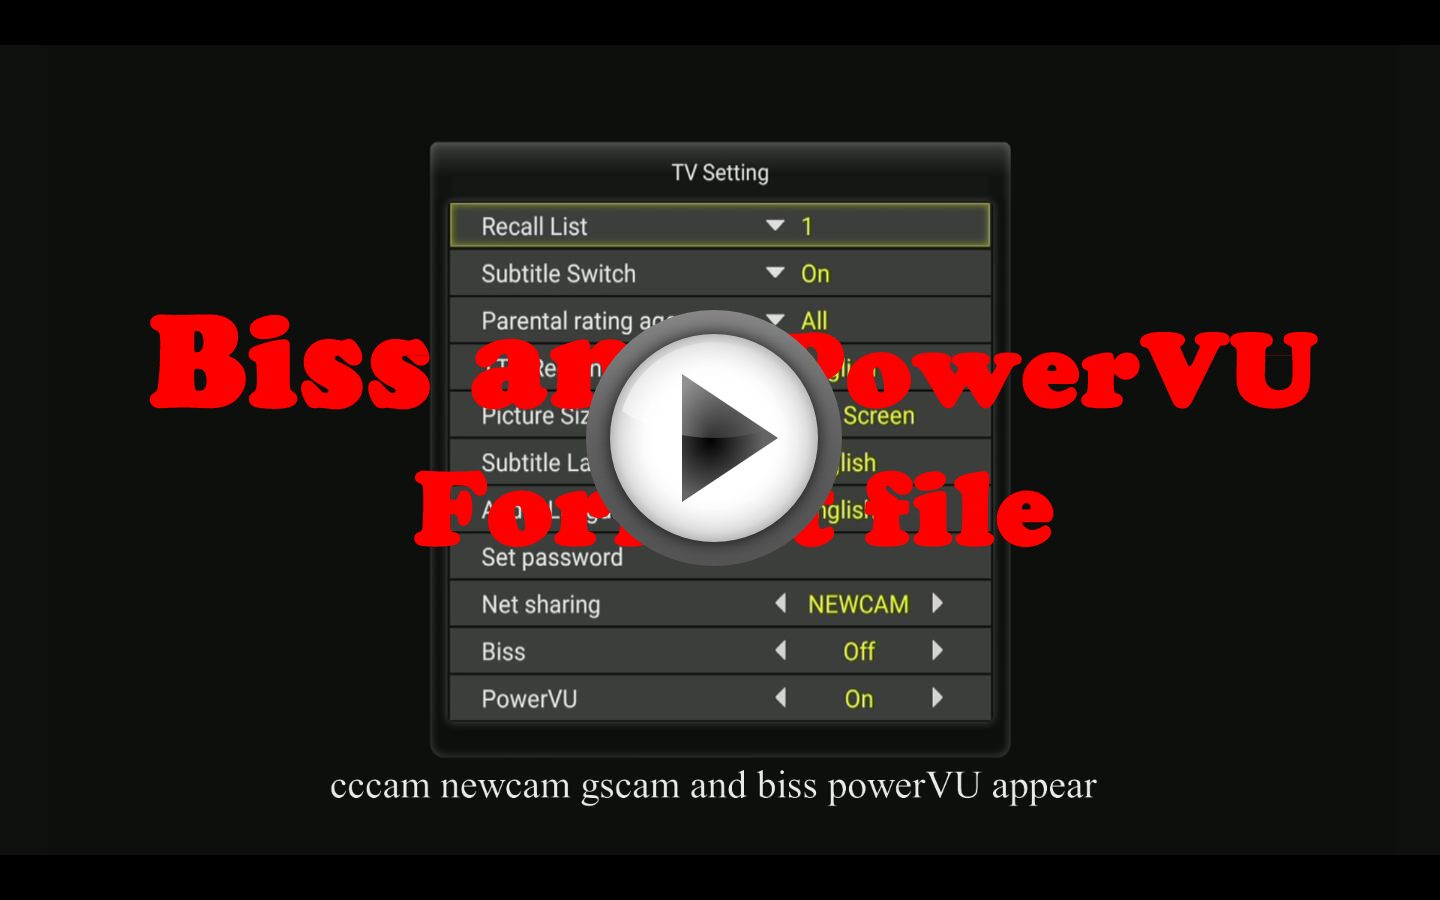 How to set up Biss and powervu keys on your tv box with format file